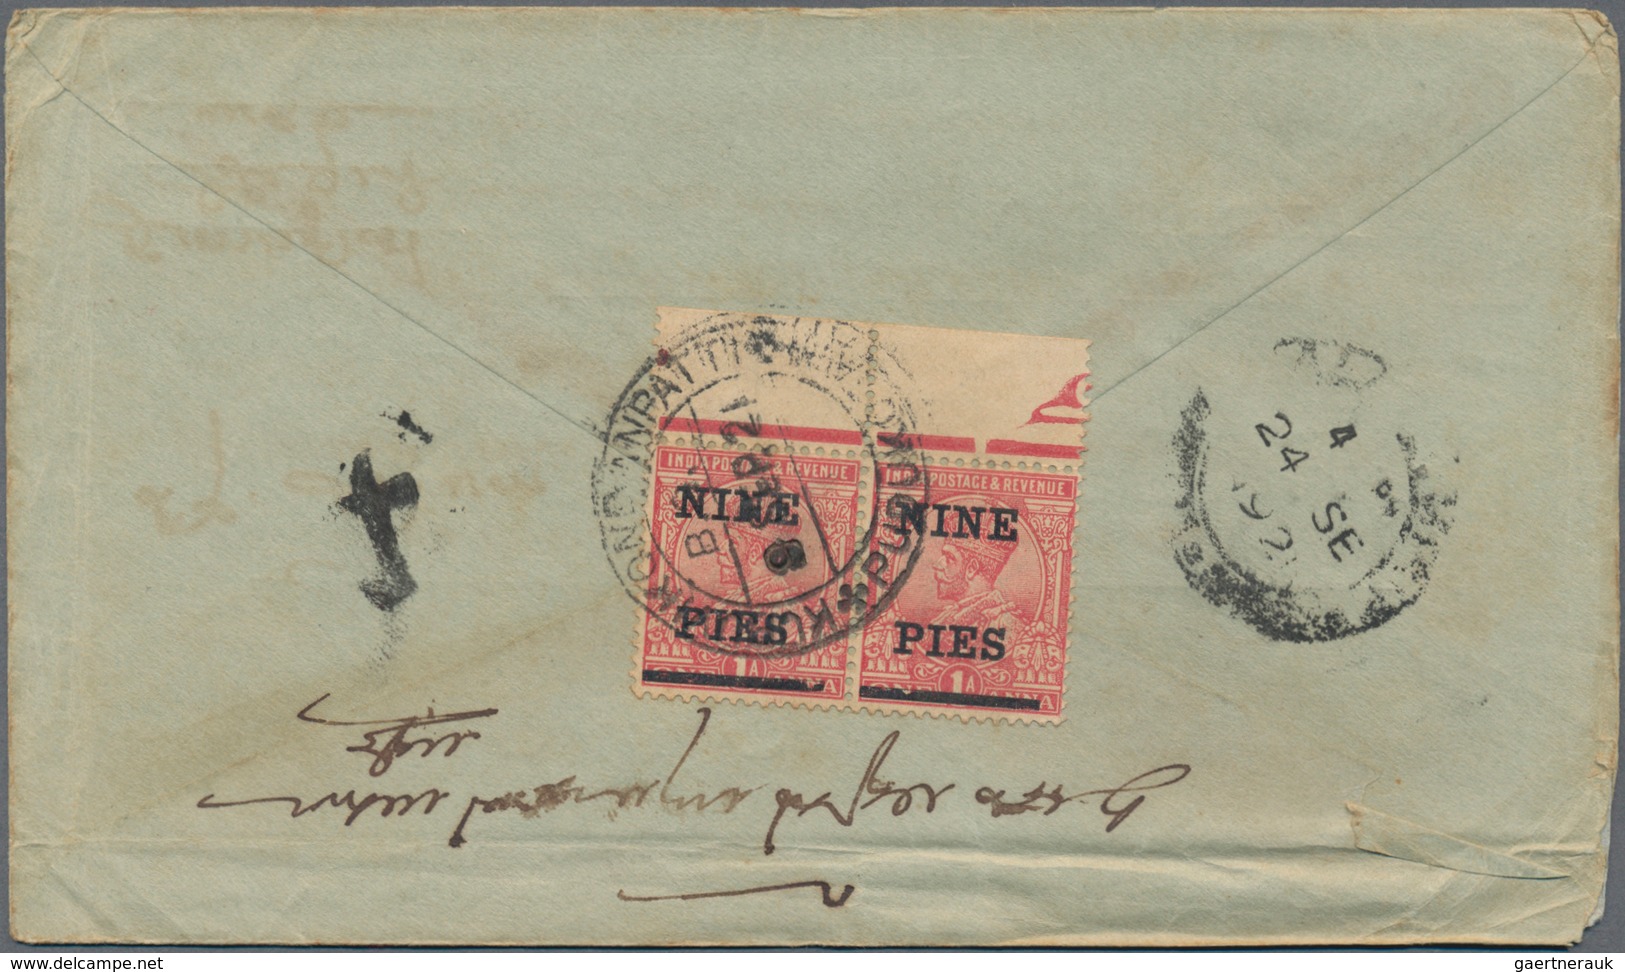 Malaiische Staaten: 1890's-1940's: 49 Covers, Postcards And Postal Stationery Items Sent From India - Federated Malay States